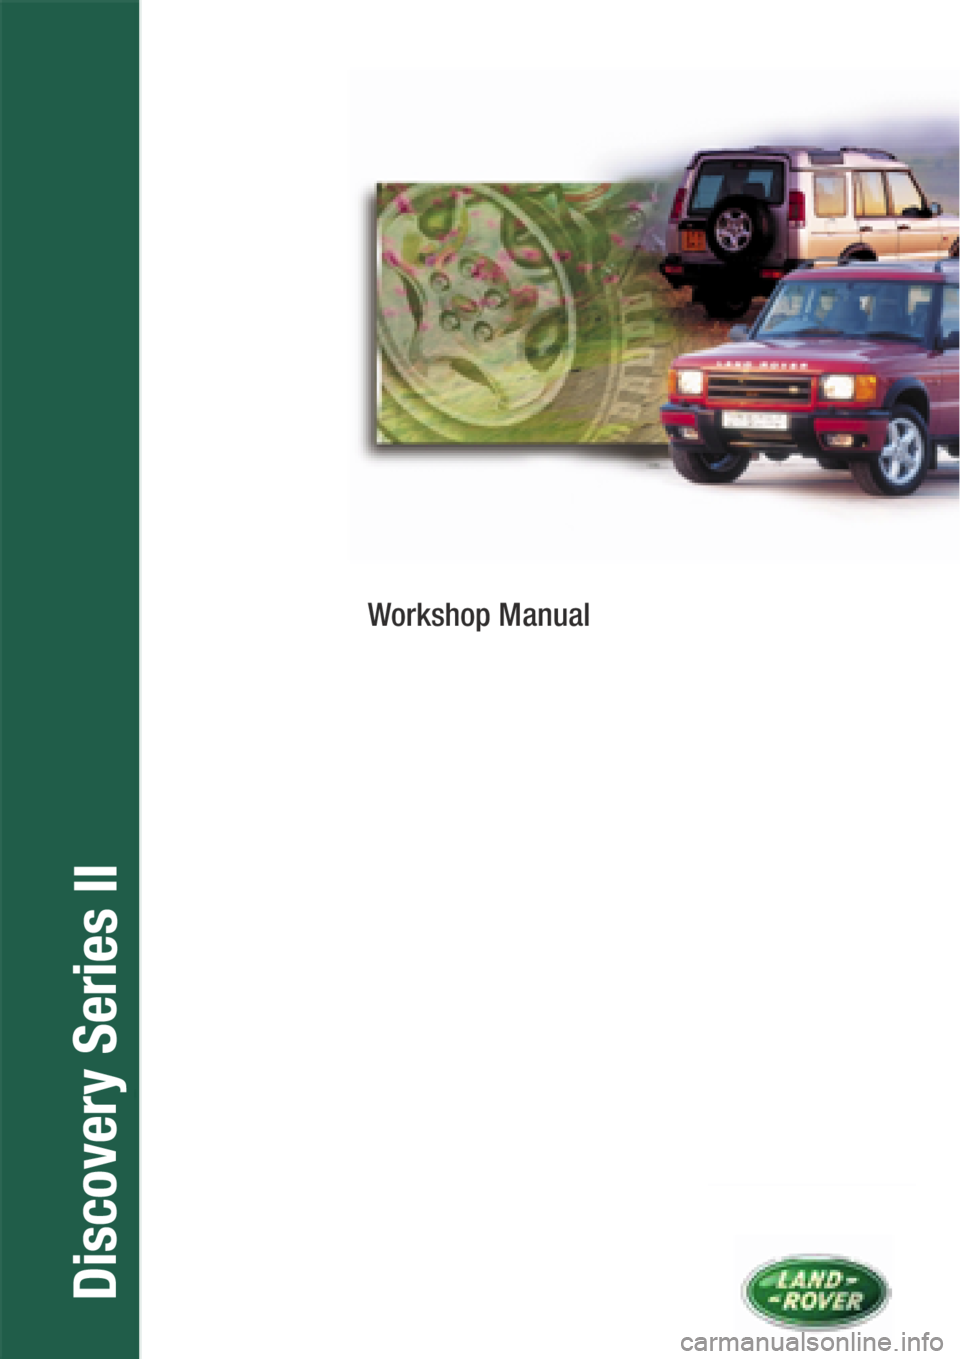 LAND ROVER DISCOVERY 1999  Workshop Manual Workshop Manual
Disco very Series II 